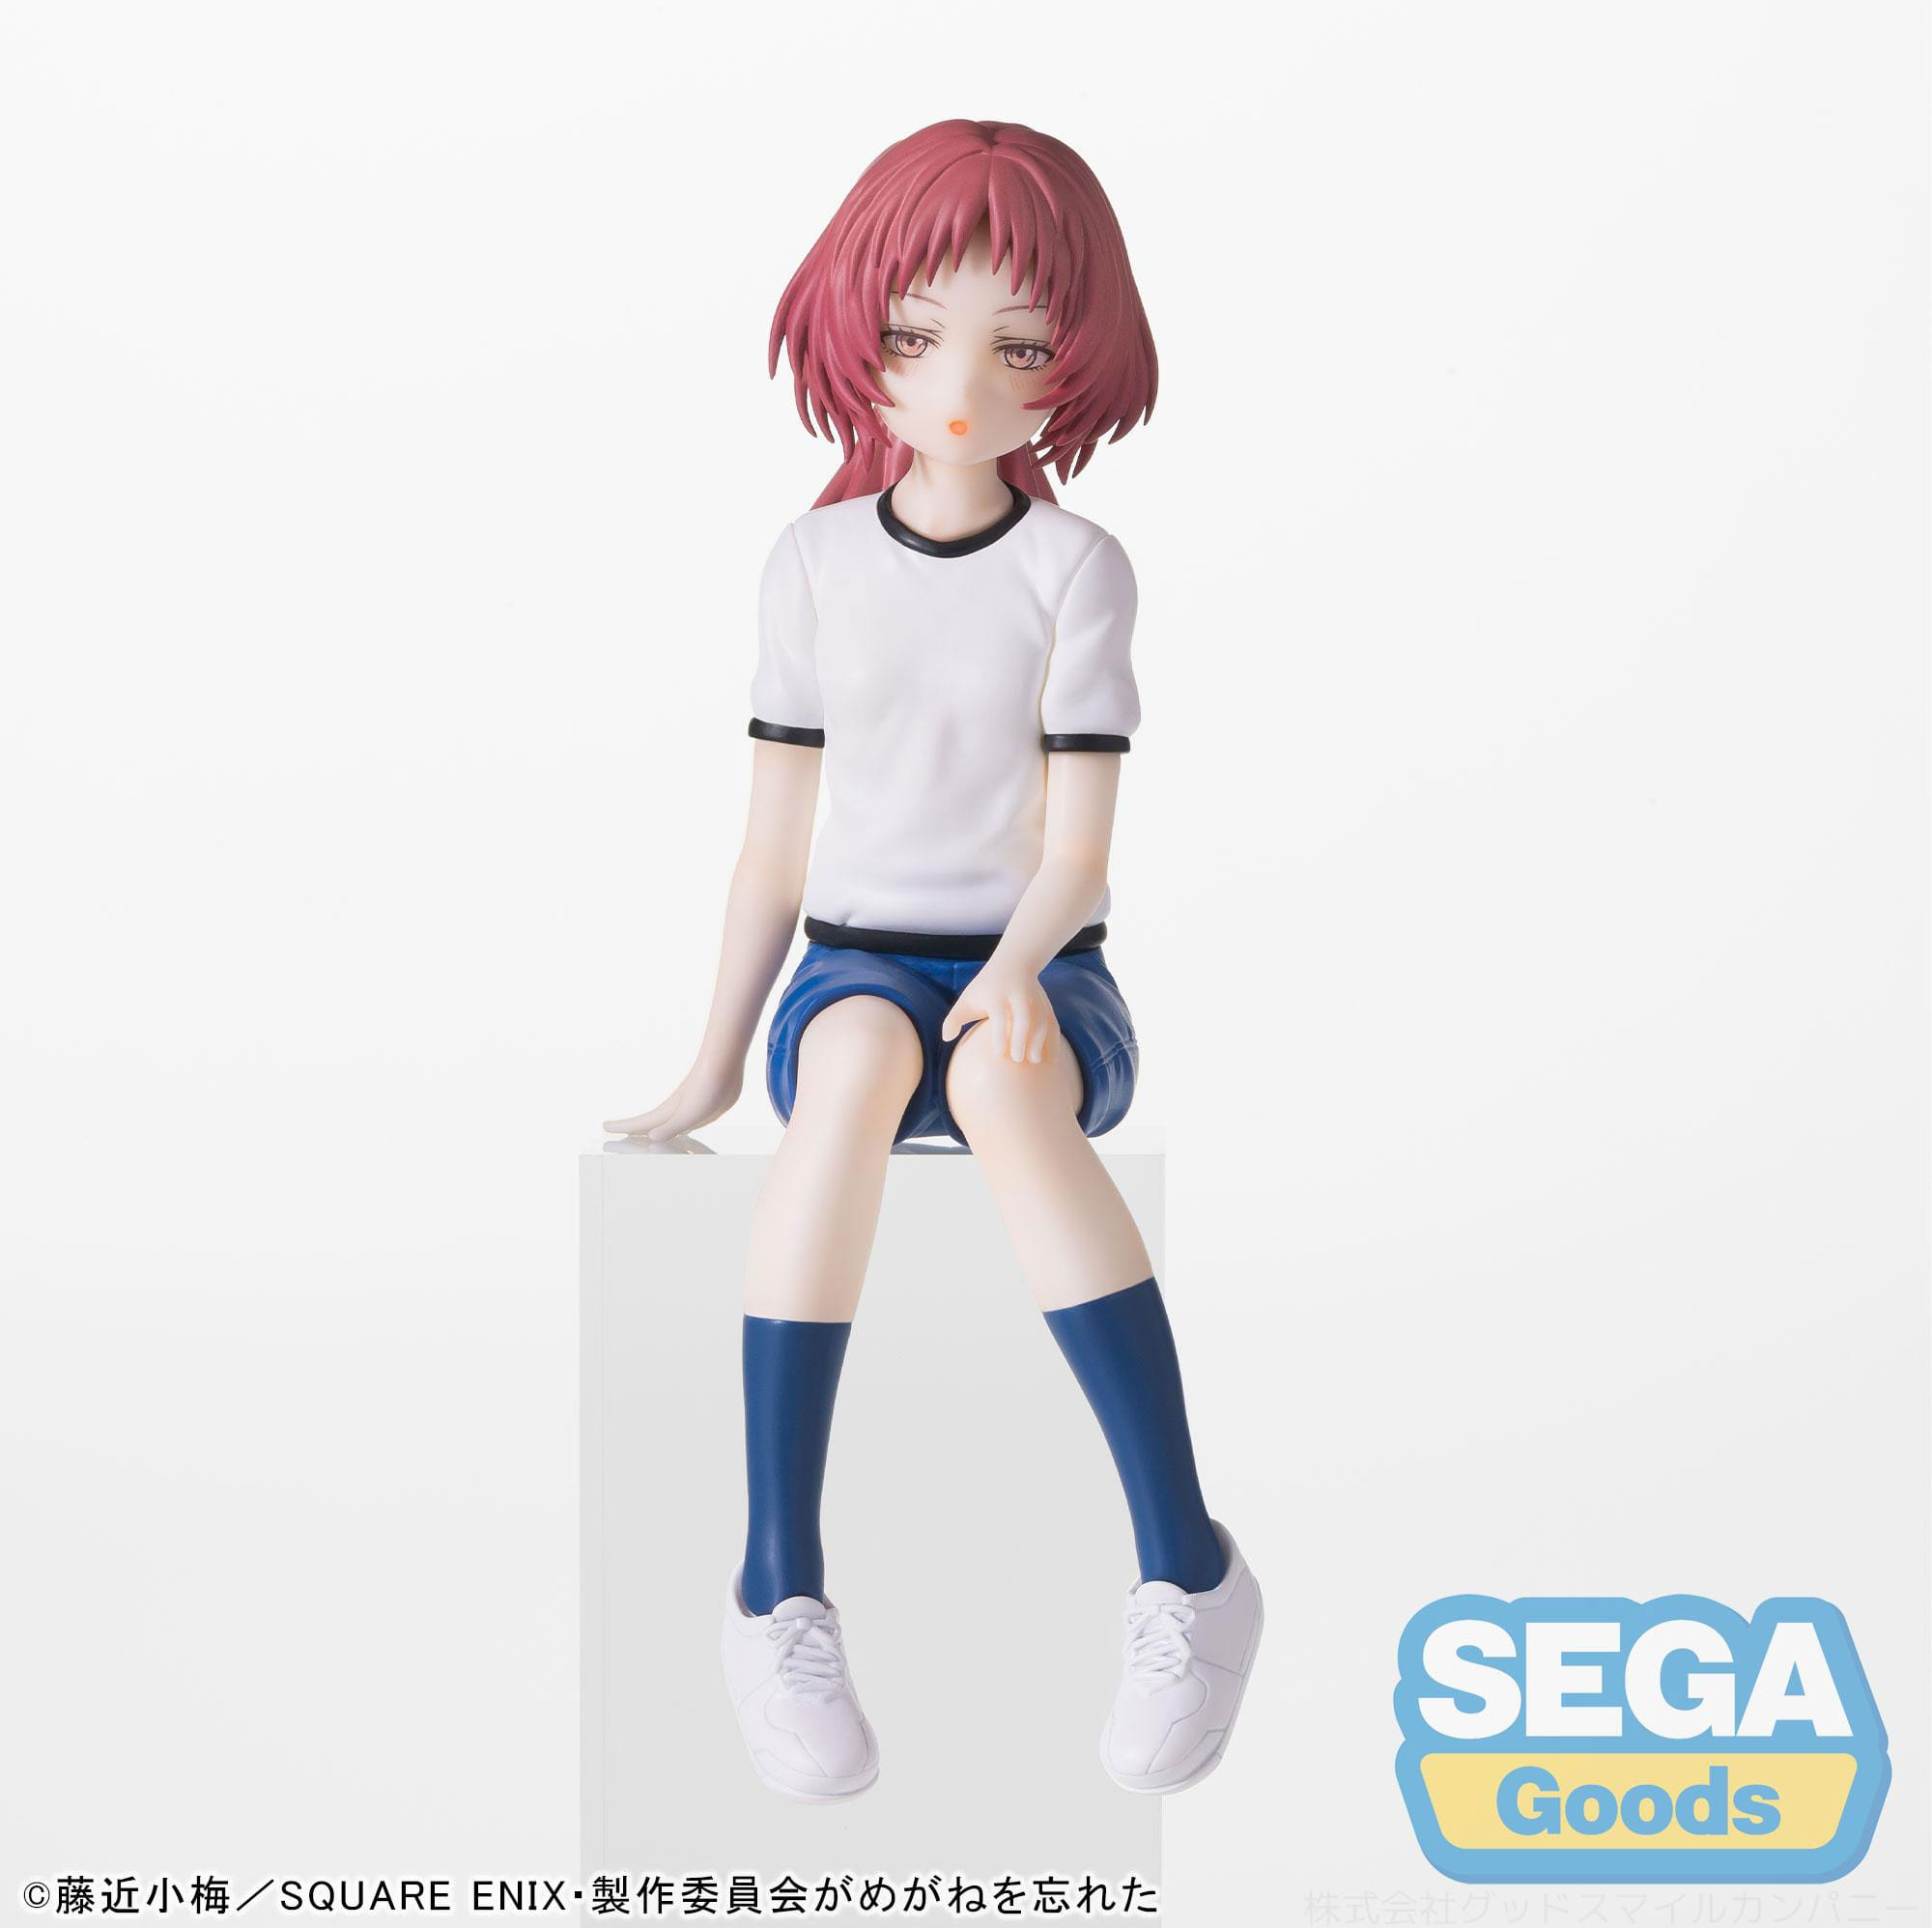 PREORDER - The Girl I Like Forgot Her Glasses PM Perching - Ai Mie - 14cm PVC Statue